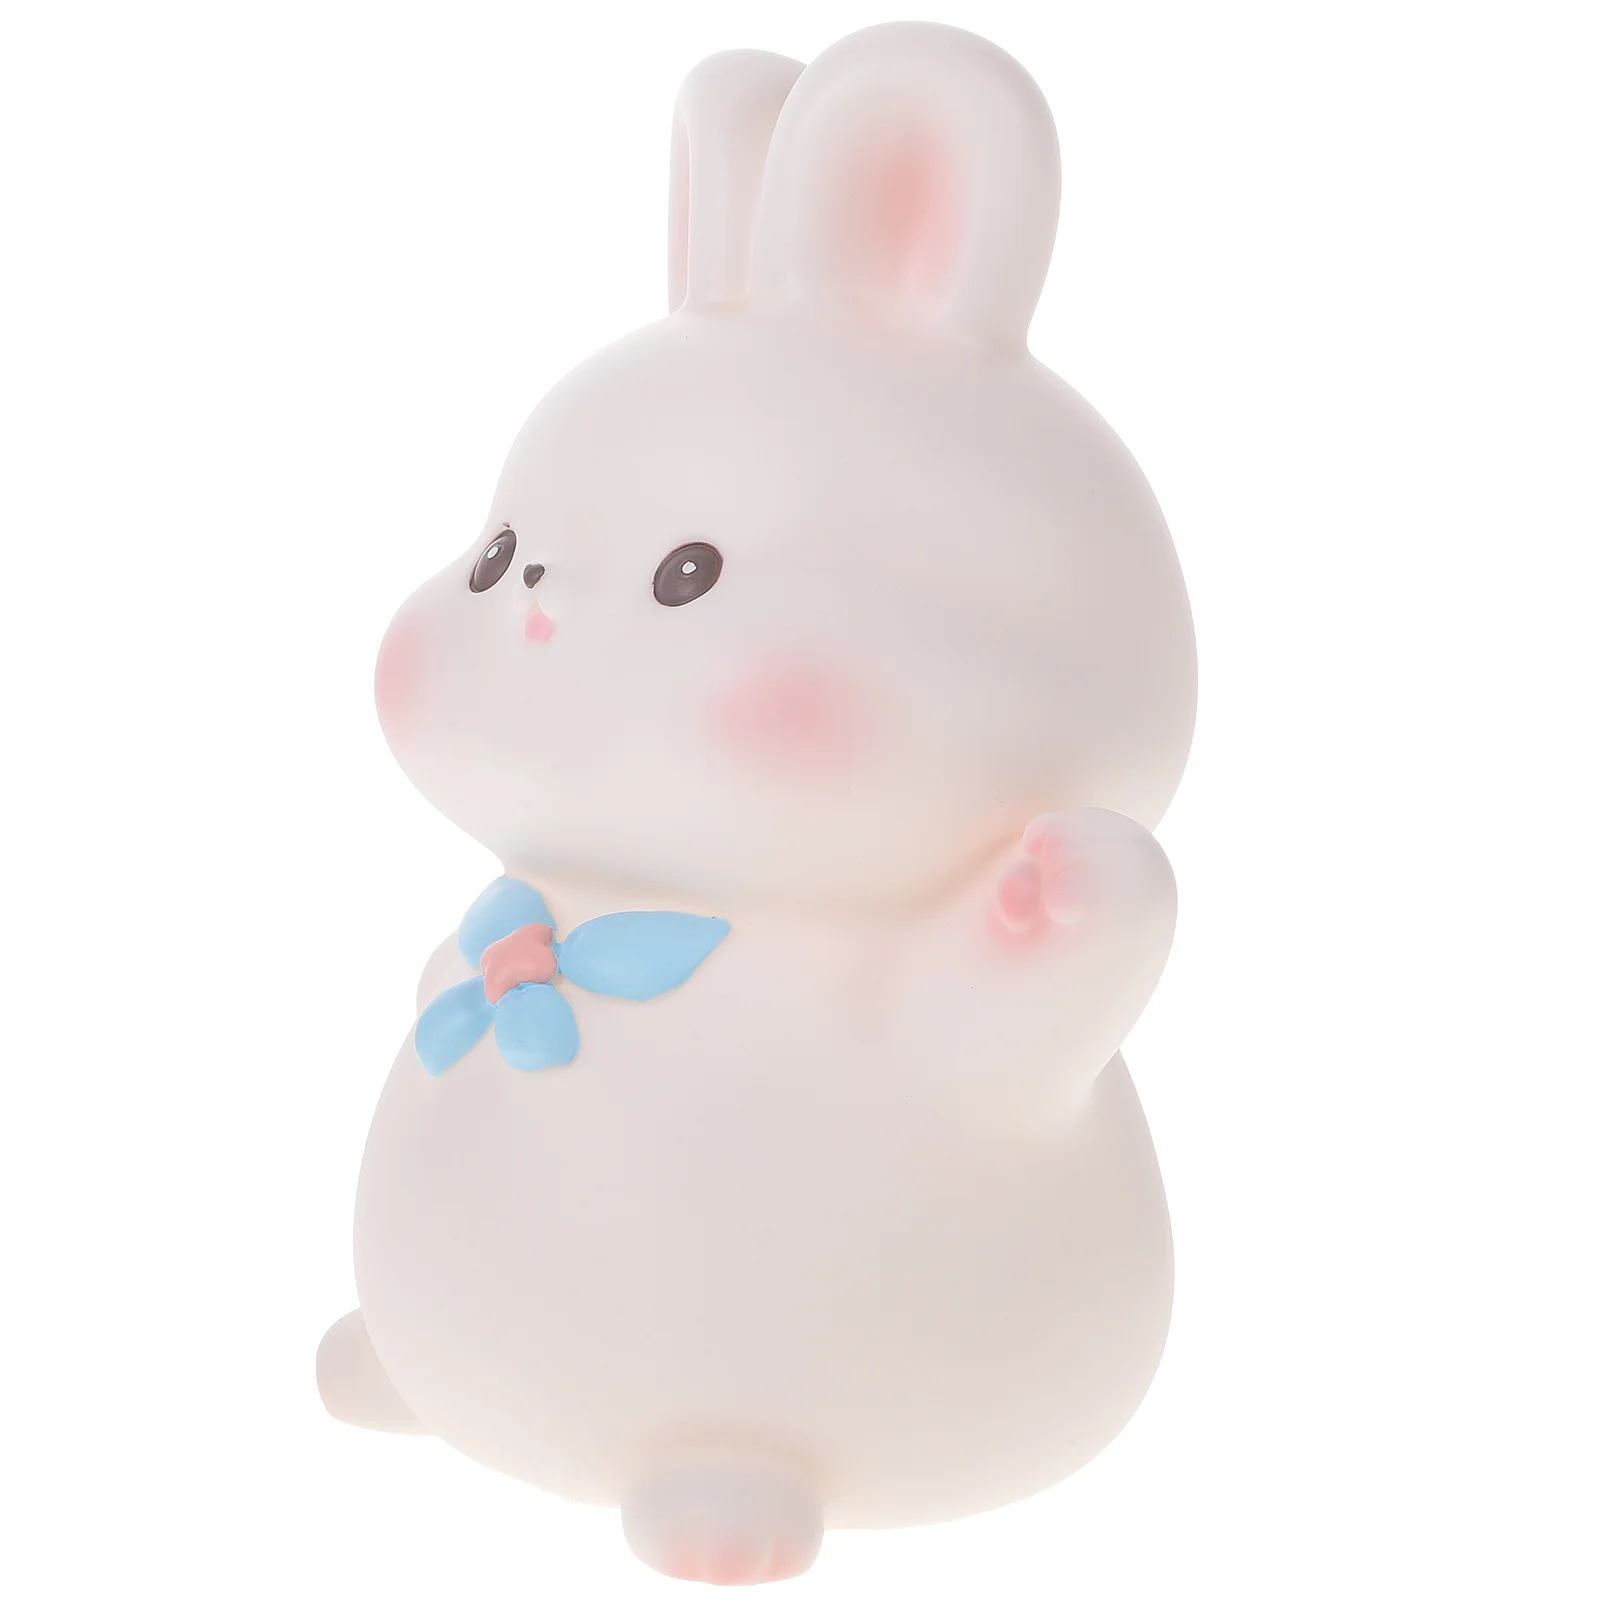 

Bank Piggy Money Saving Bunny Rabbit Easter Animal Coin Banks Box Pot Kids Toys Novelty Container Figurine Figurines Accessory